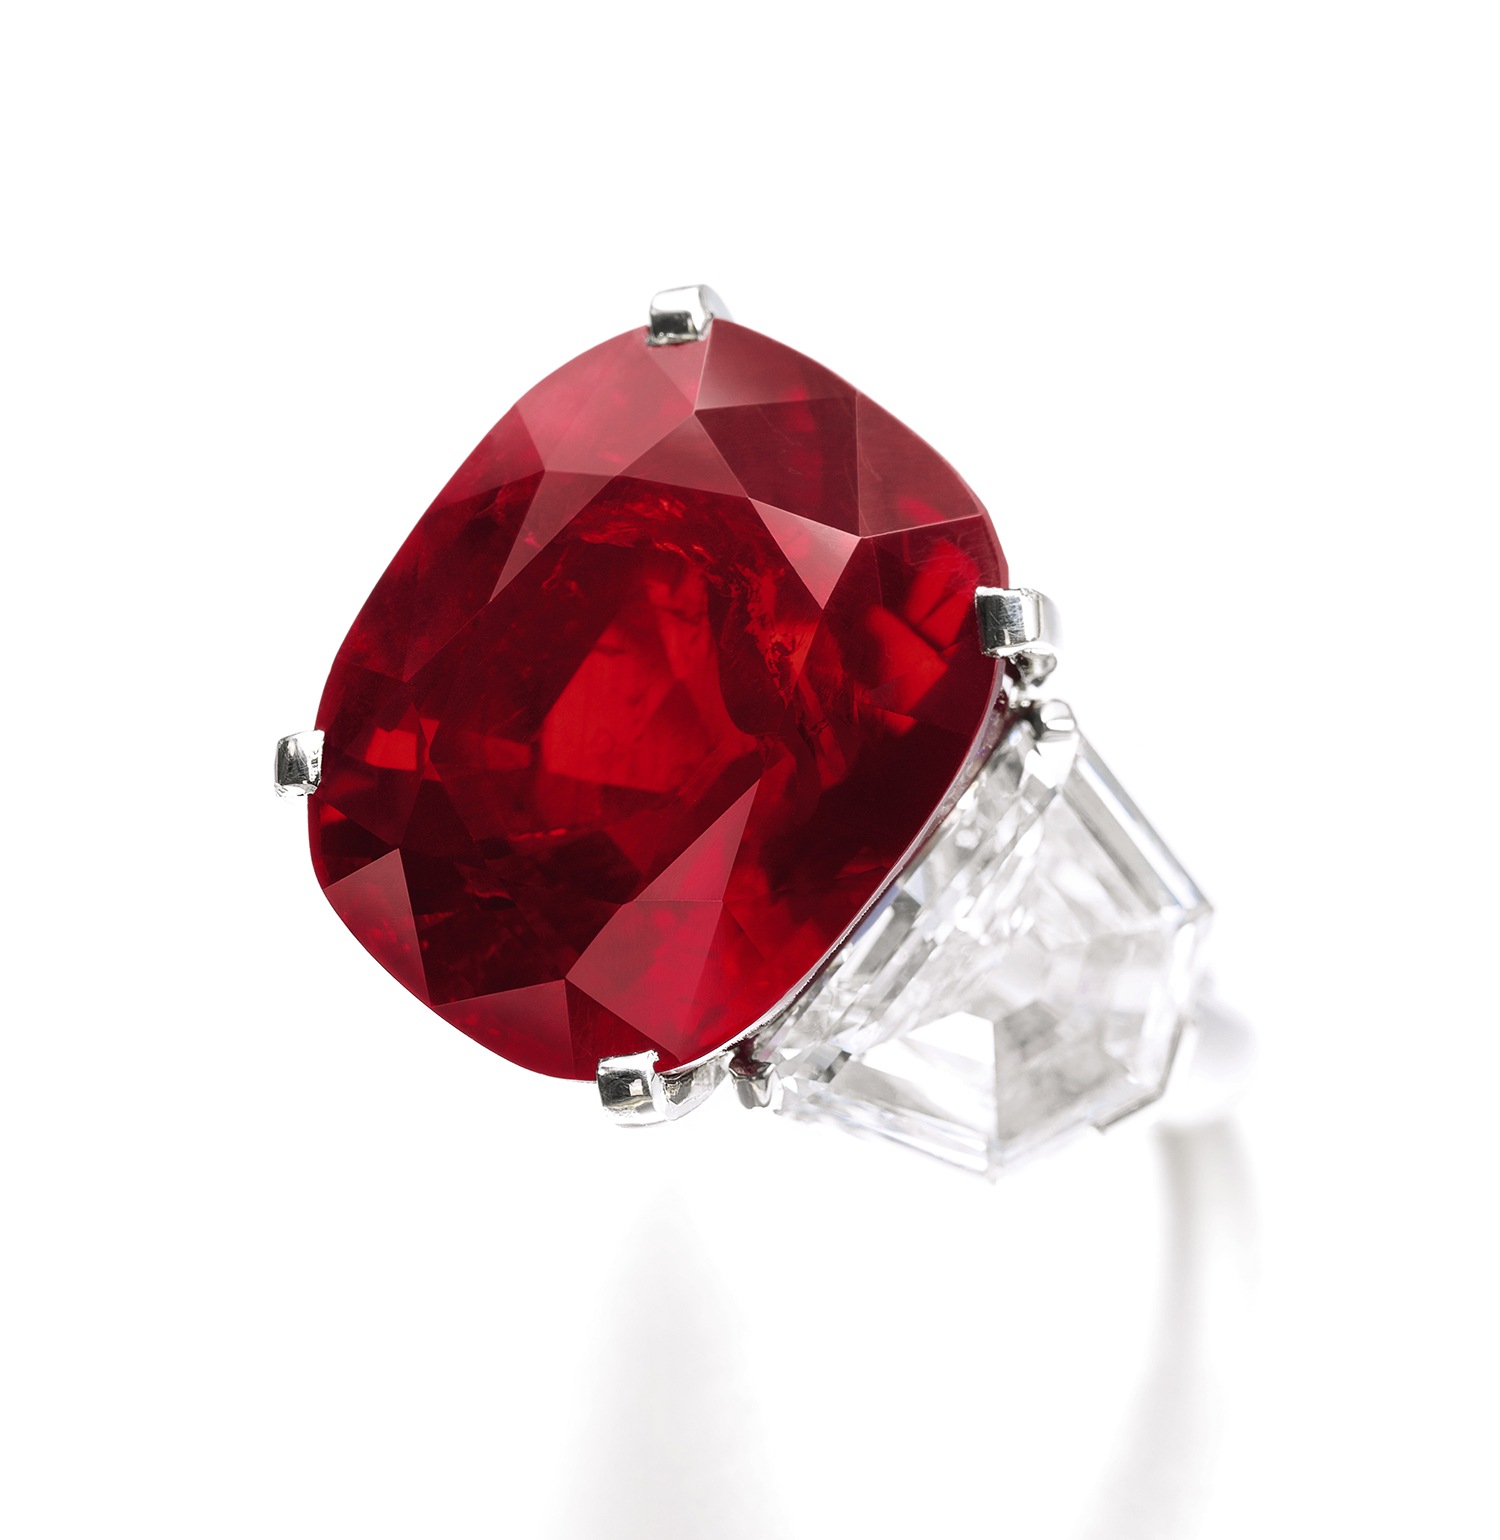 See the World’s Rarest and Most Famous Rubies Galerie